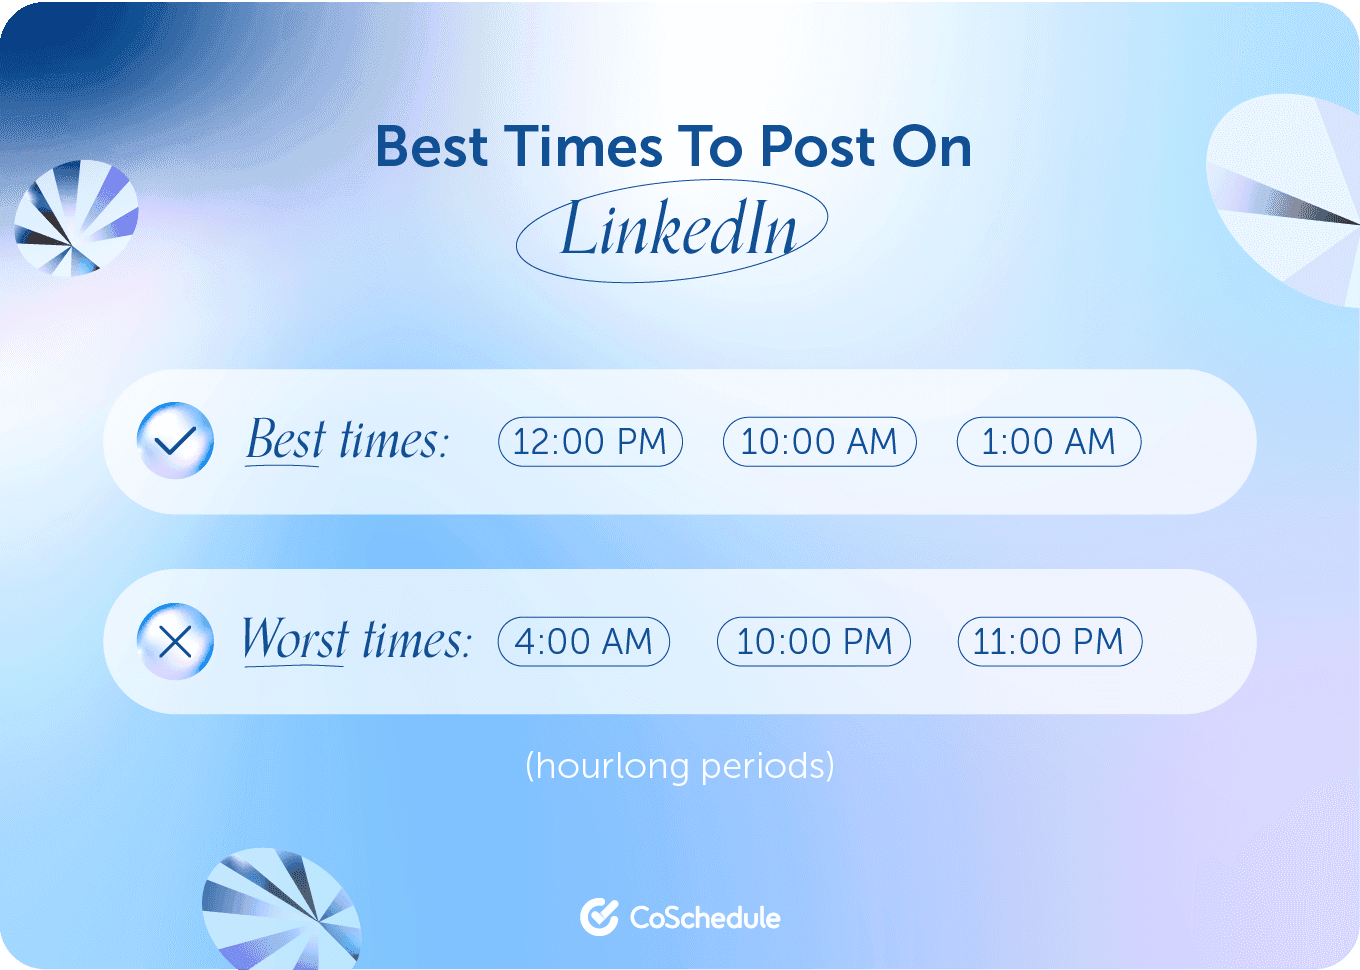 Best and worst times to post on LinkedIn